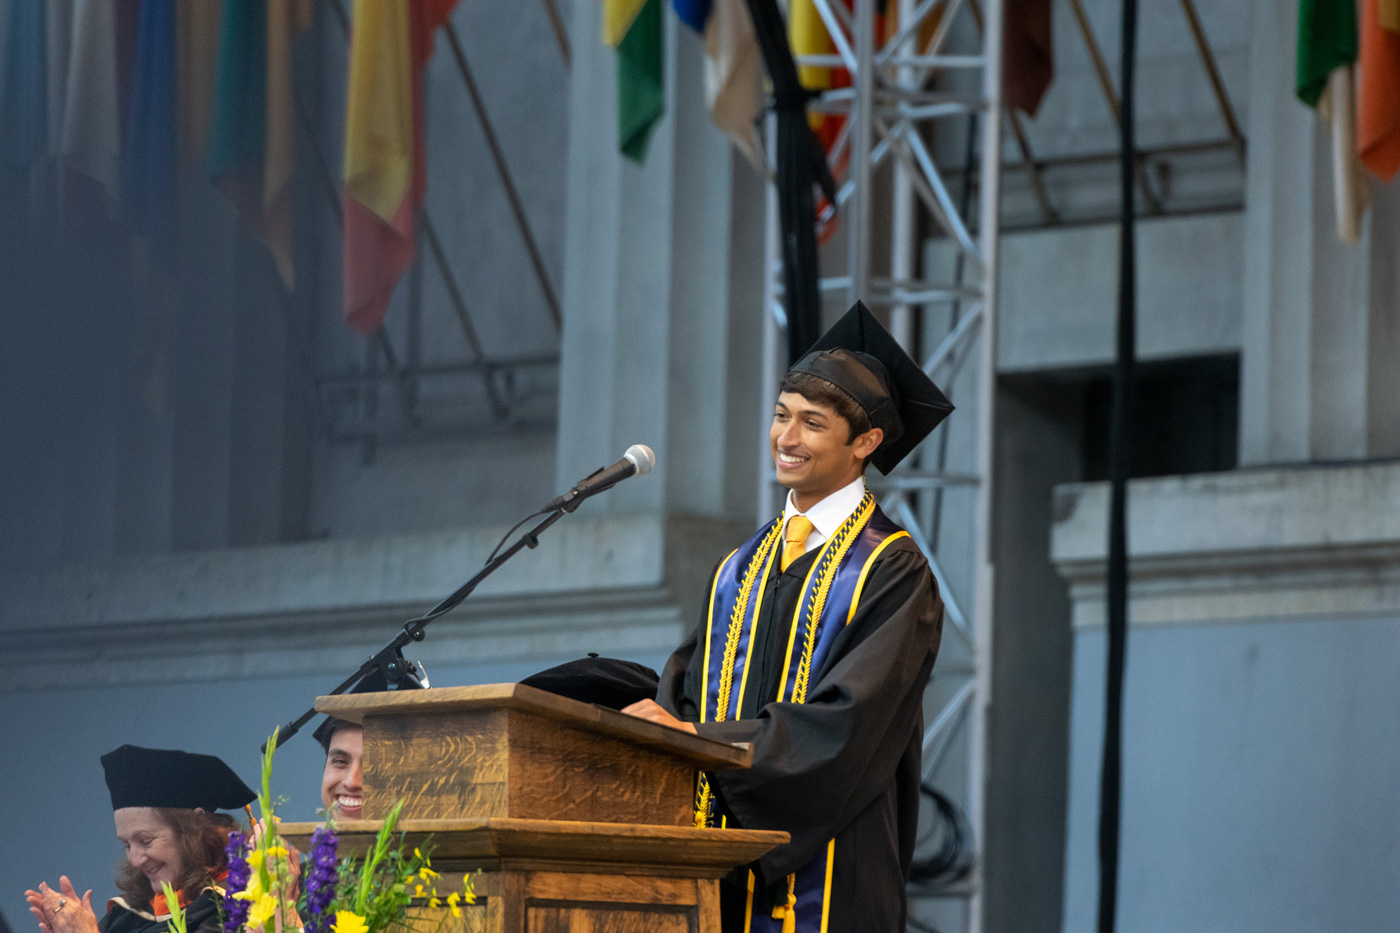 A photo of a man wearing graduation regalia smiling from behind a lectern.